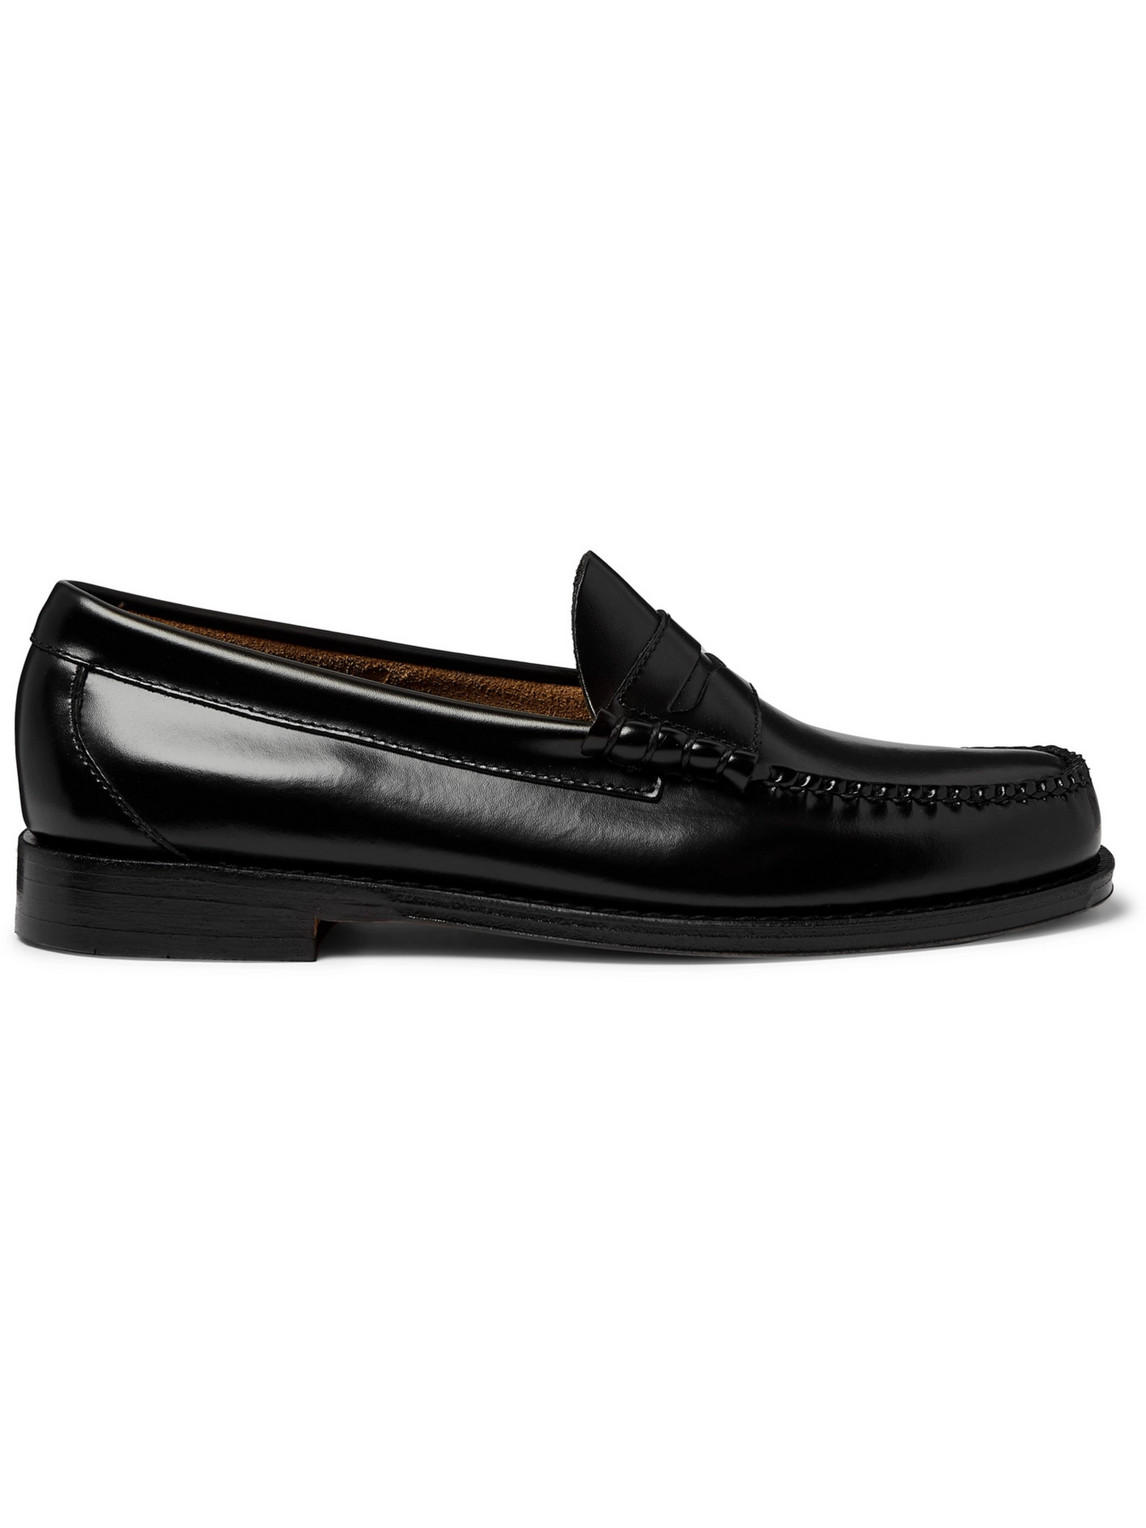 G.H. Bass & Co. - Weejuns Heritage Larson Leather Penny Loafers - Men - Black - UK 10.5 von G.H. Bass & Co.